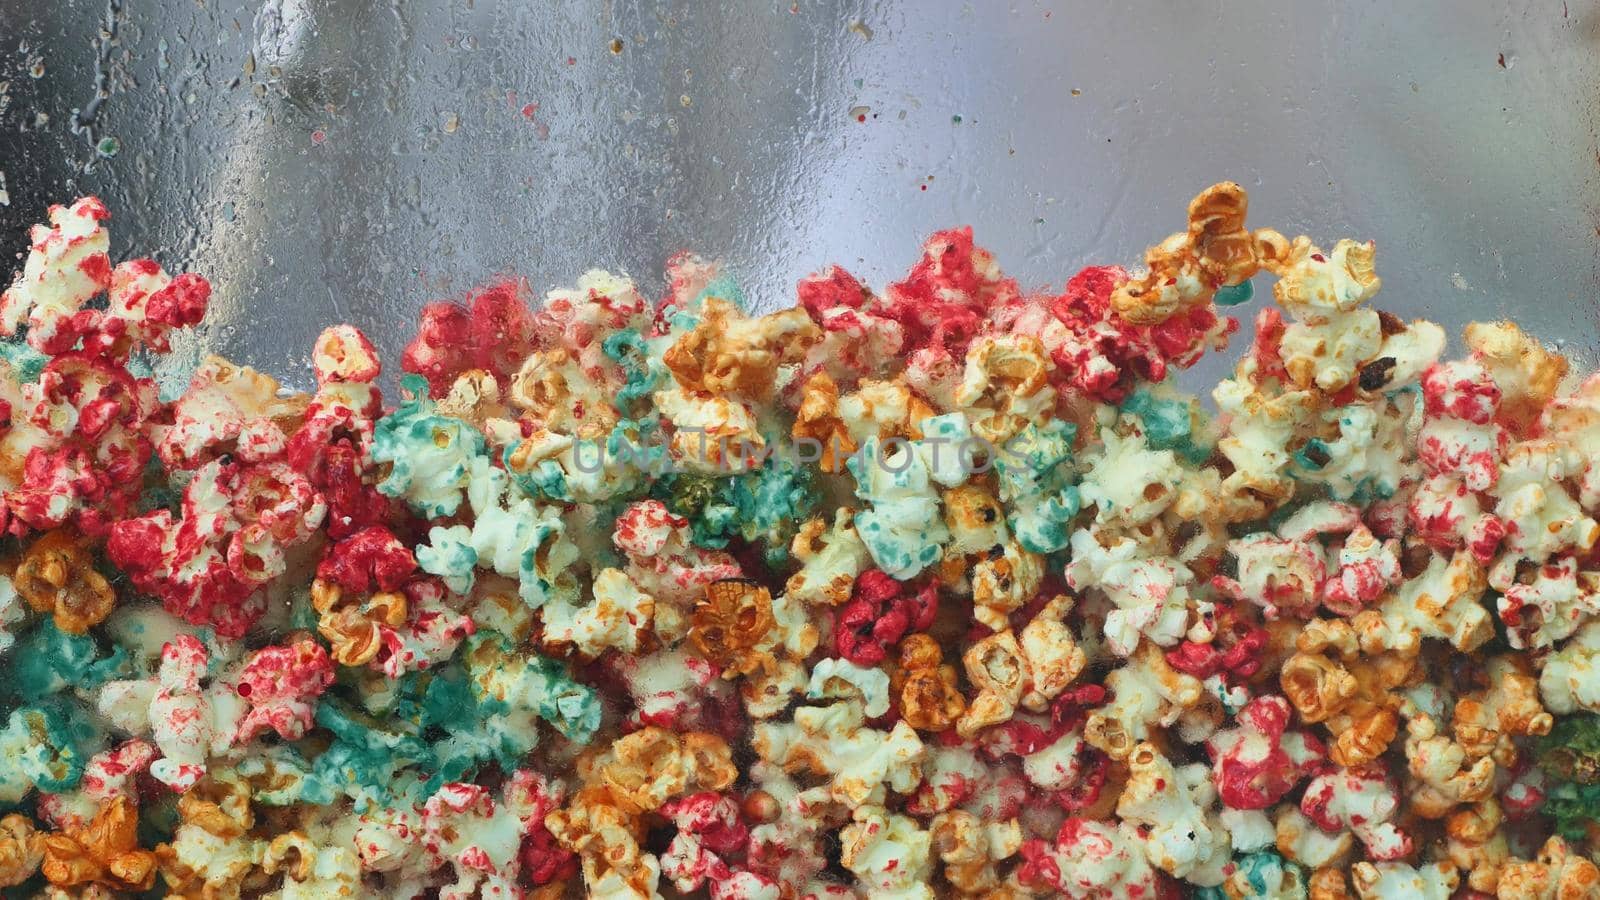 Colored and delicious fried popcorn on the street. by DovidPro